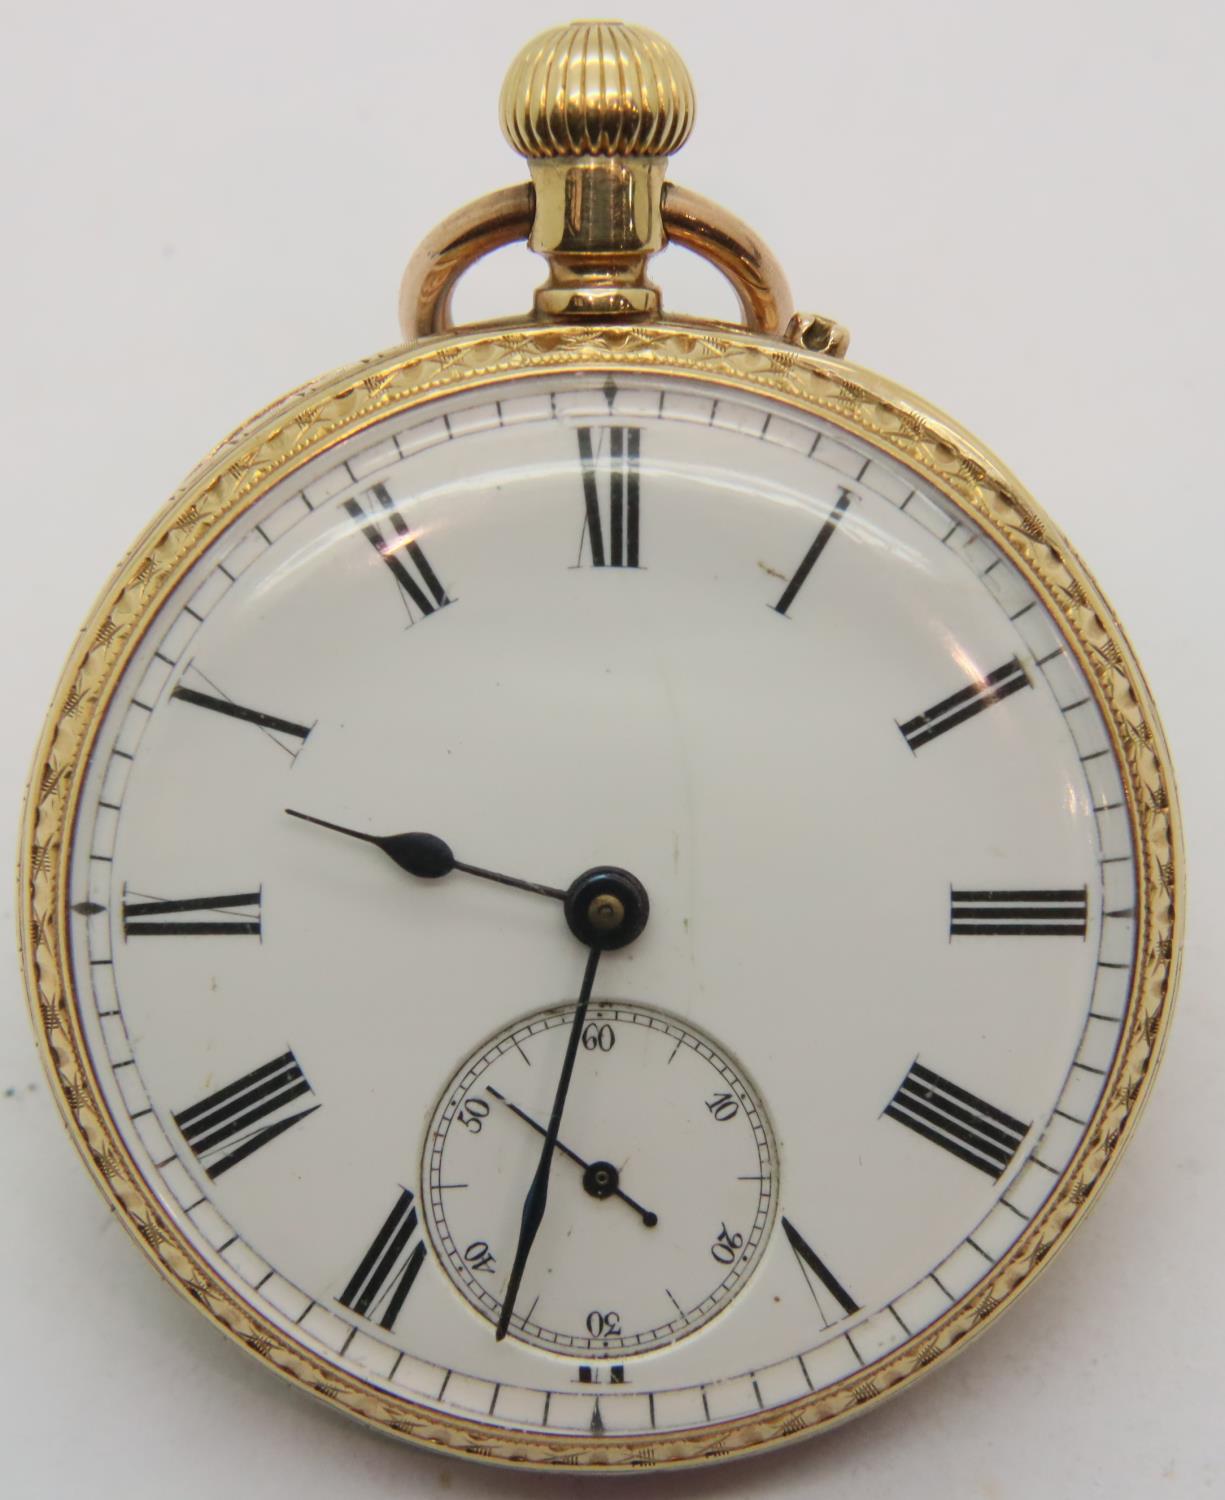 18ct gold fob watch in good working order, white enamel dial with Roman numerals and subsidiary - Image 5 of 12